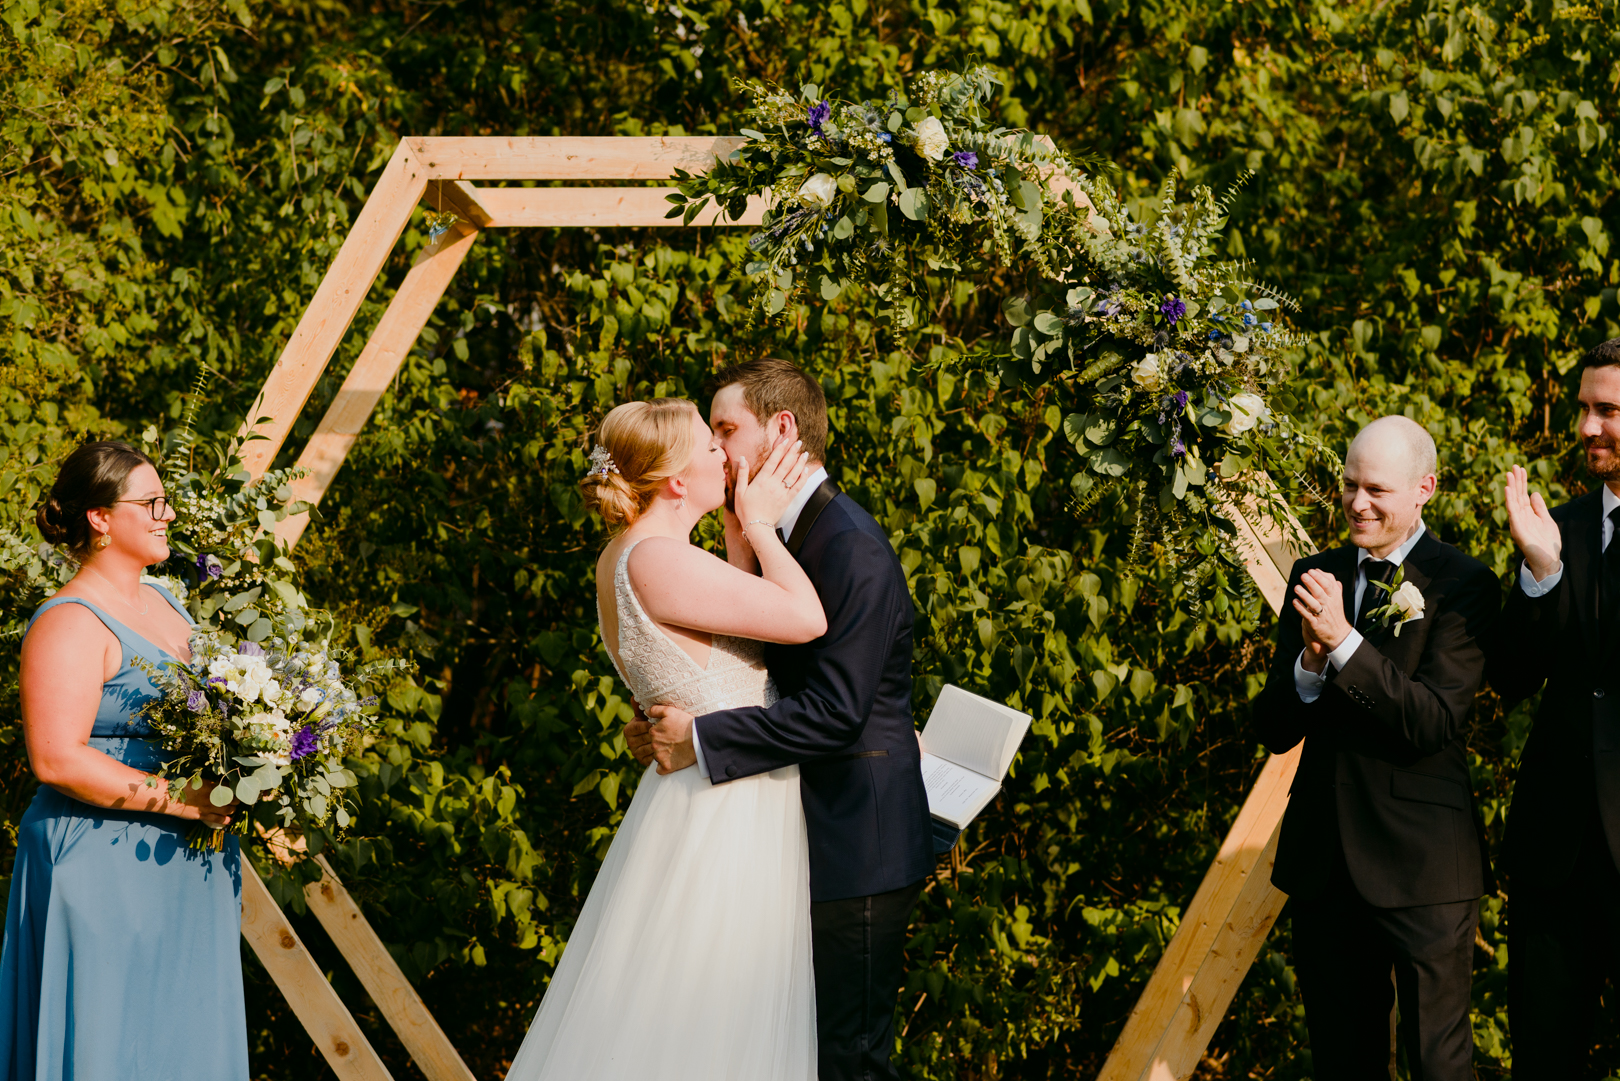 bride and groom first kiss in front of wooden hexagon during outdoor wedding ceremony